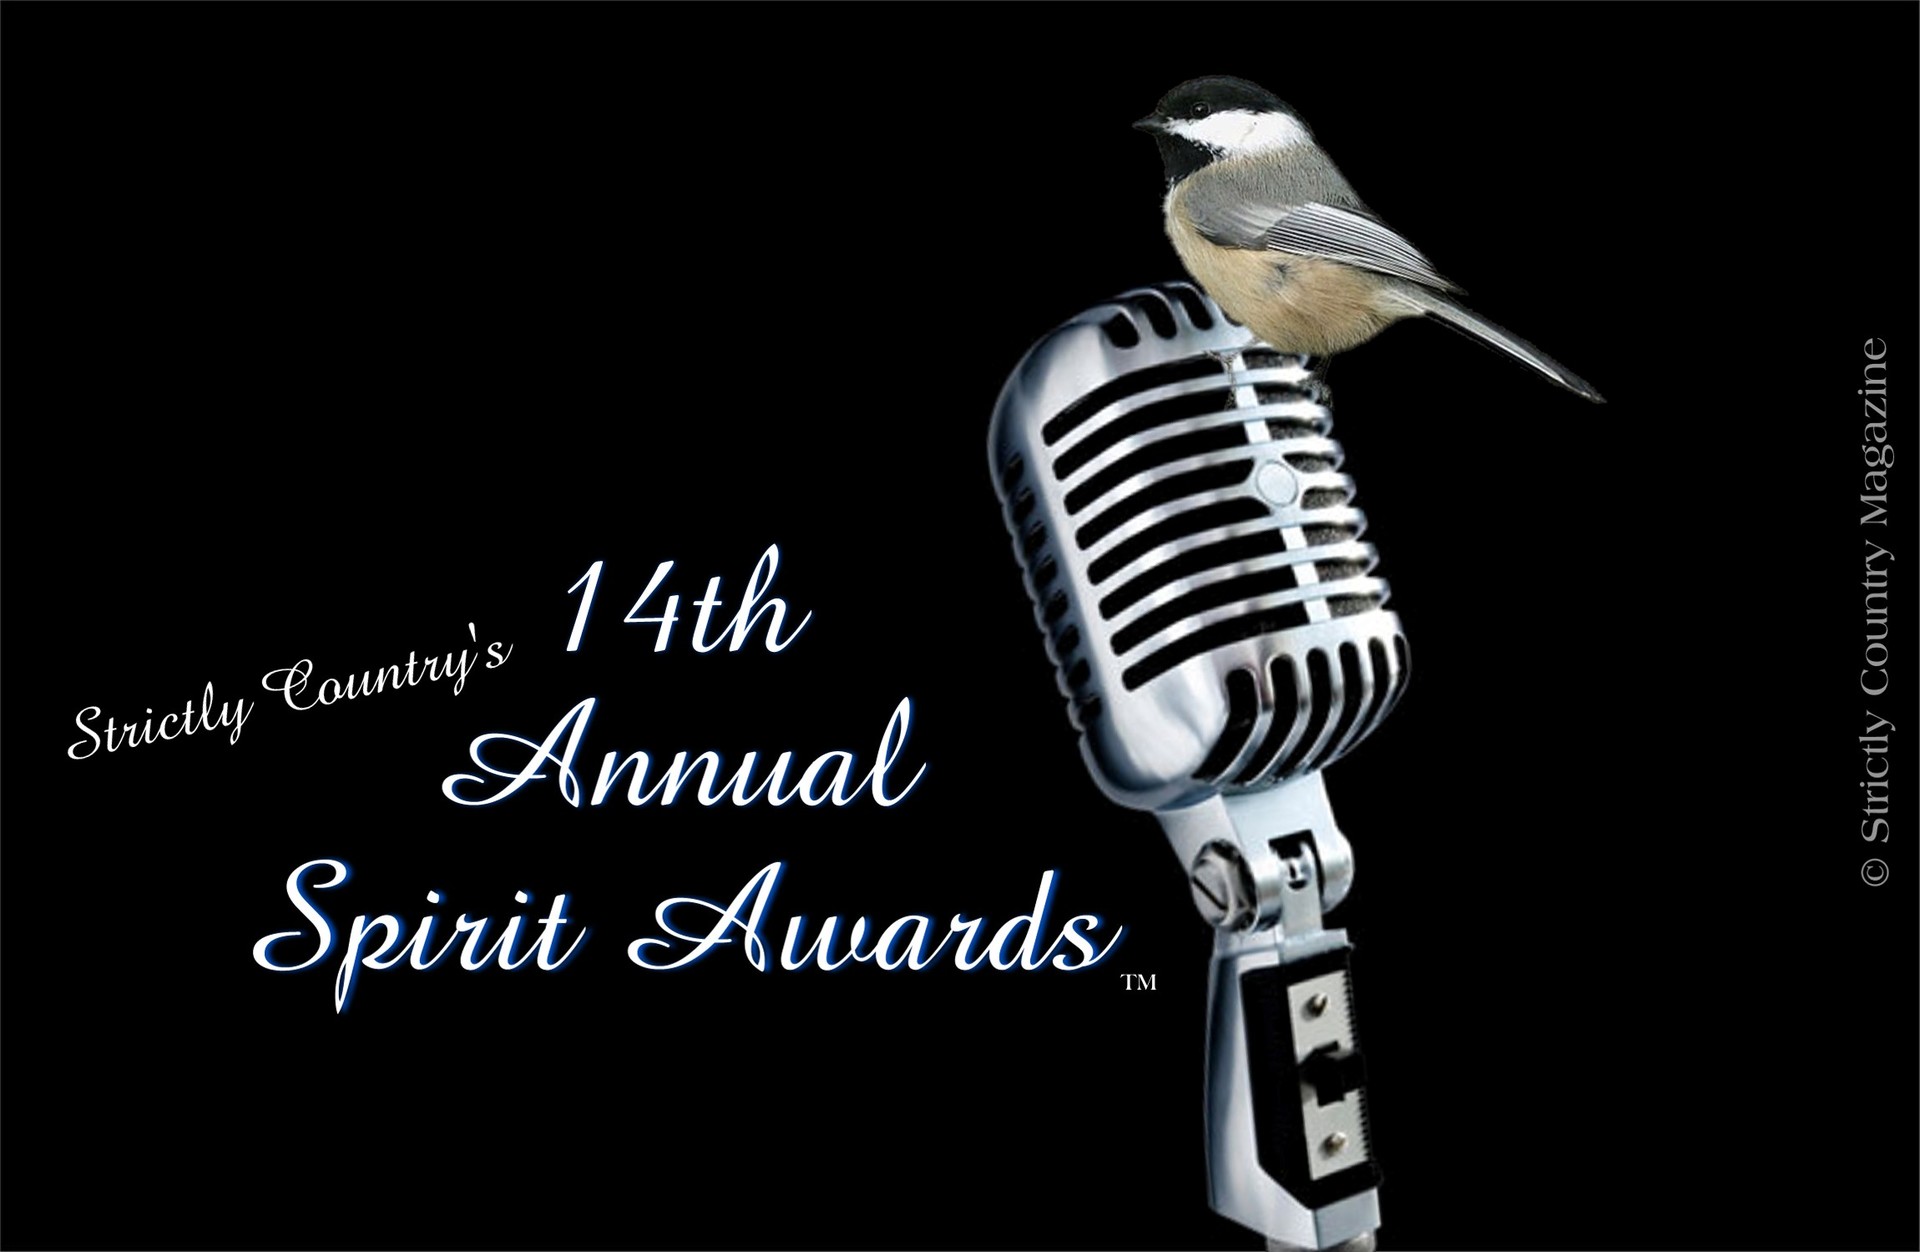 Strictly Country Magazine copyright 14th Annual Spirit Awards official logo